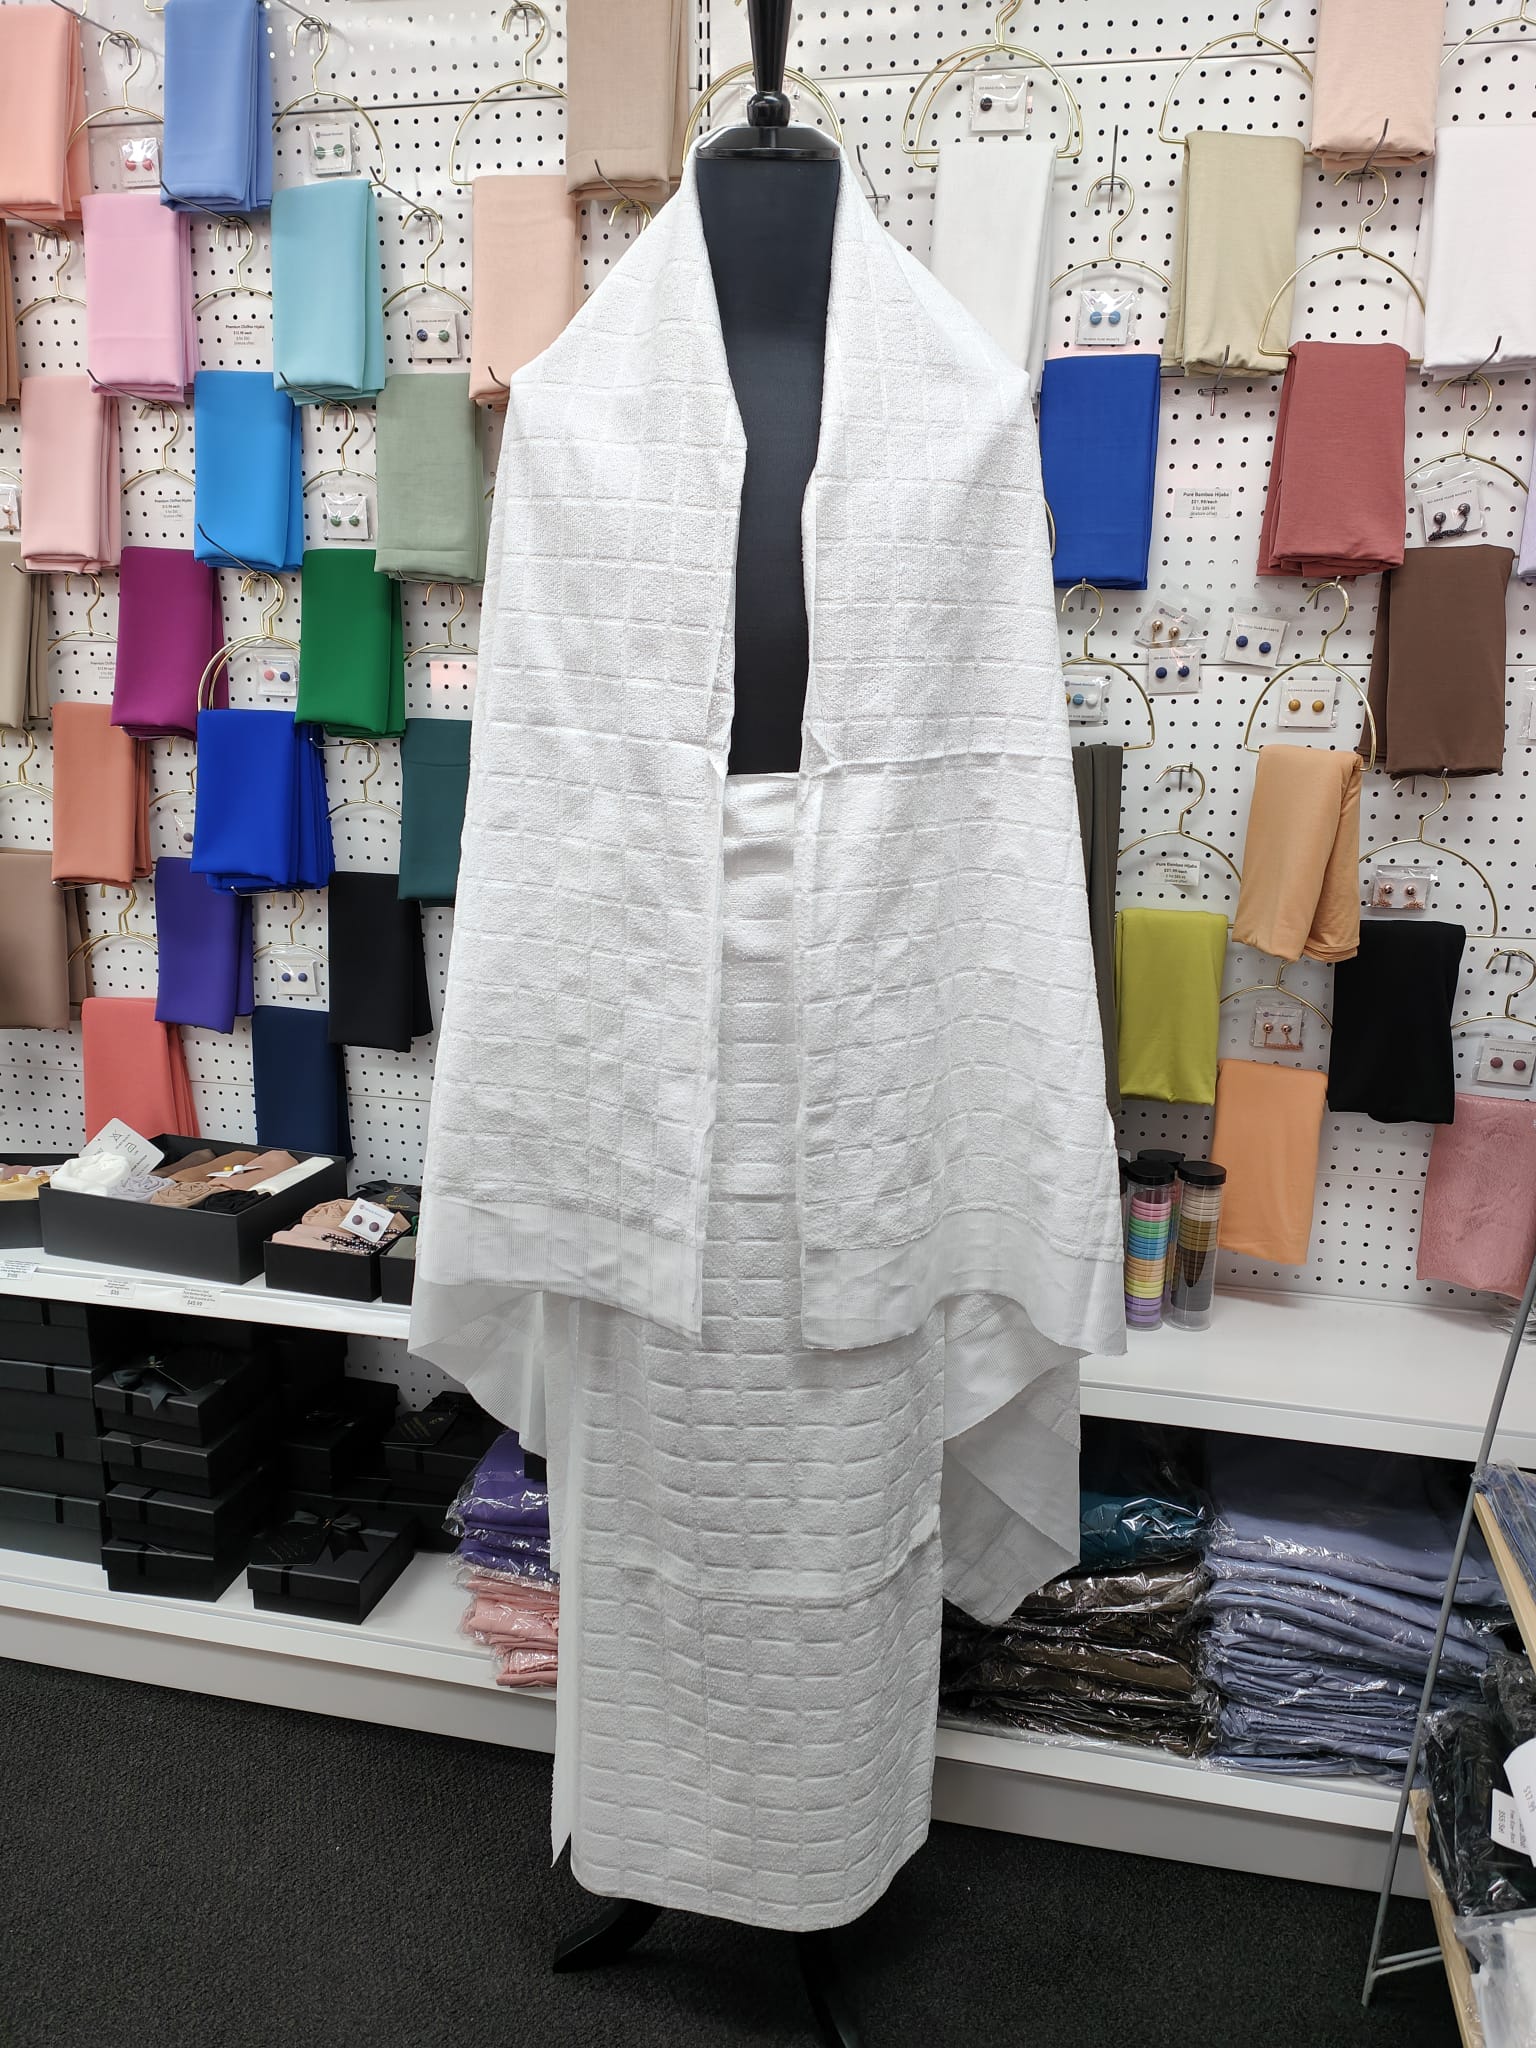 Discover the pinnacle of comfort and tradition with our Men's Ihram for Hajj and Umrah at Hikmah Boutique. Immerse yourself in the divine journey with the best quality, optimal dimensions, and timeless elegance. Explore our exclusive Ihram for Hajj and Umrah, your pilgrimage, our priority at Hikmah Boutique.